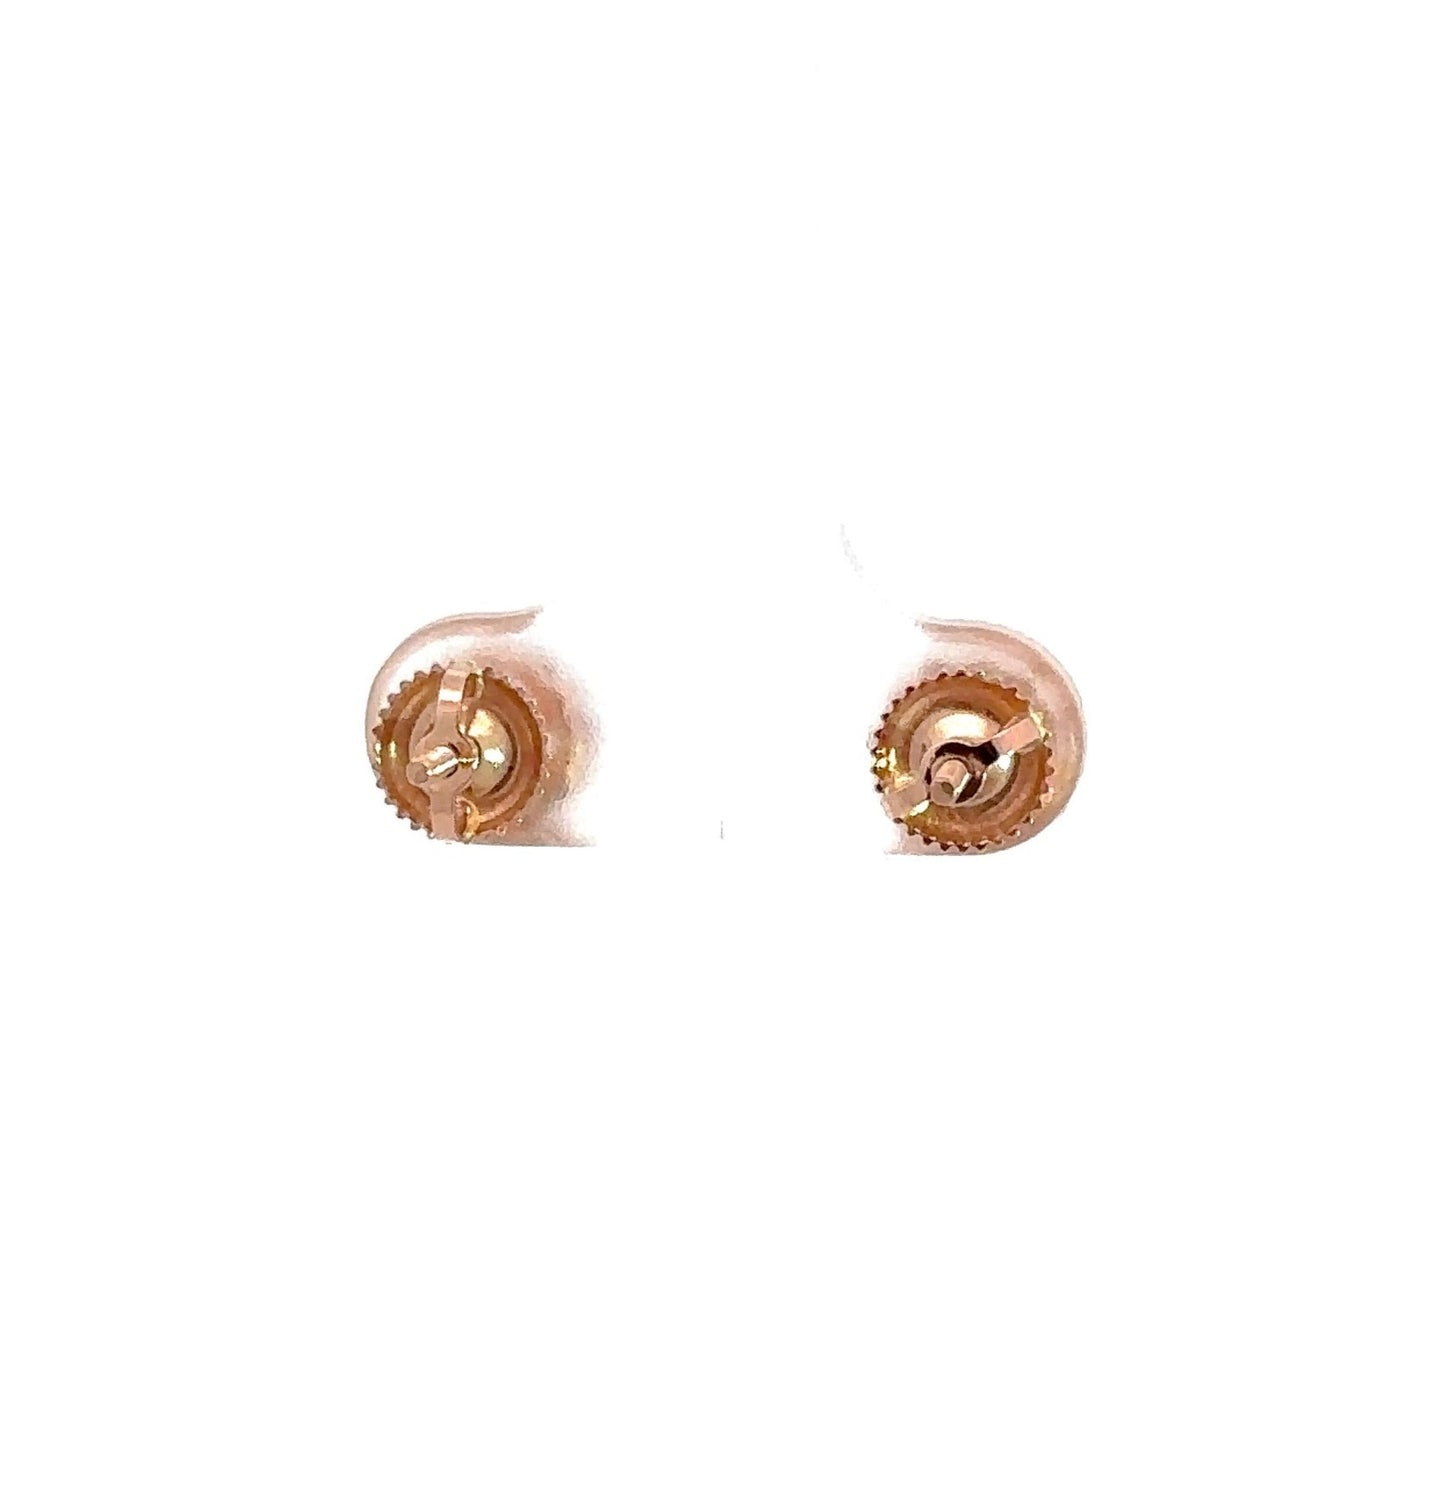 Back of earrings with rose gold screwbacks